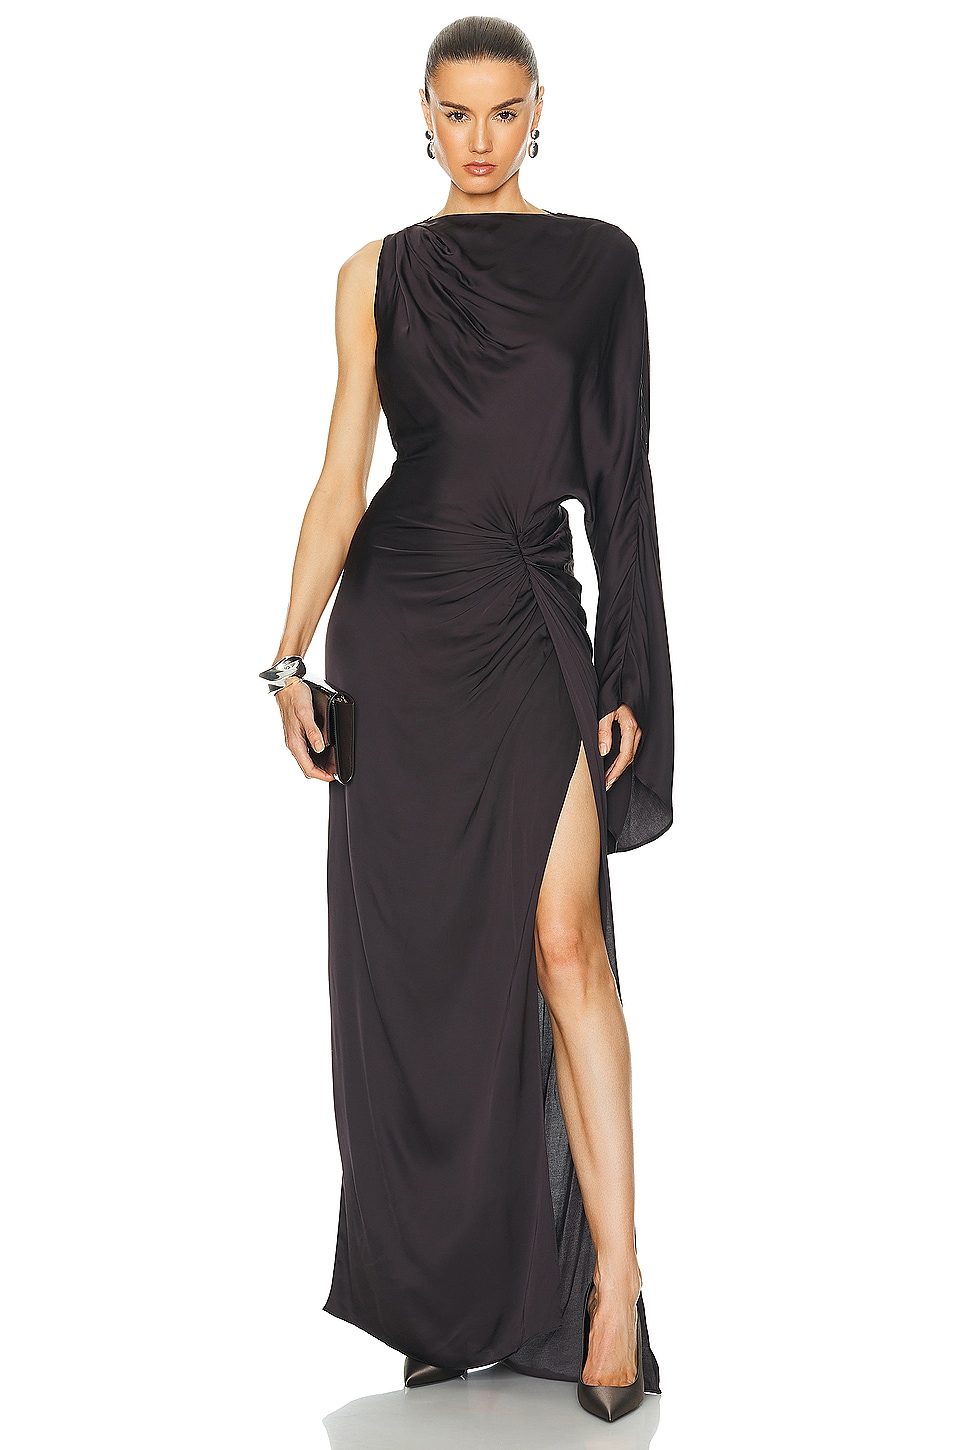 by Marianna Cassia Gown in Chocolate